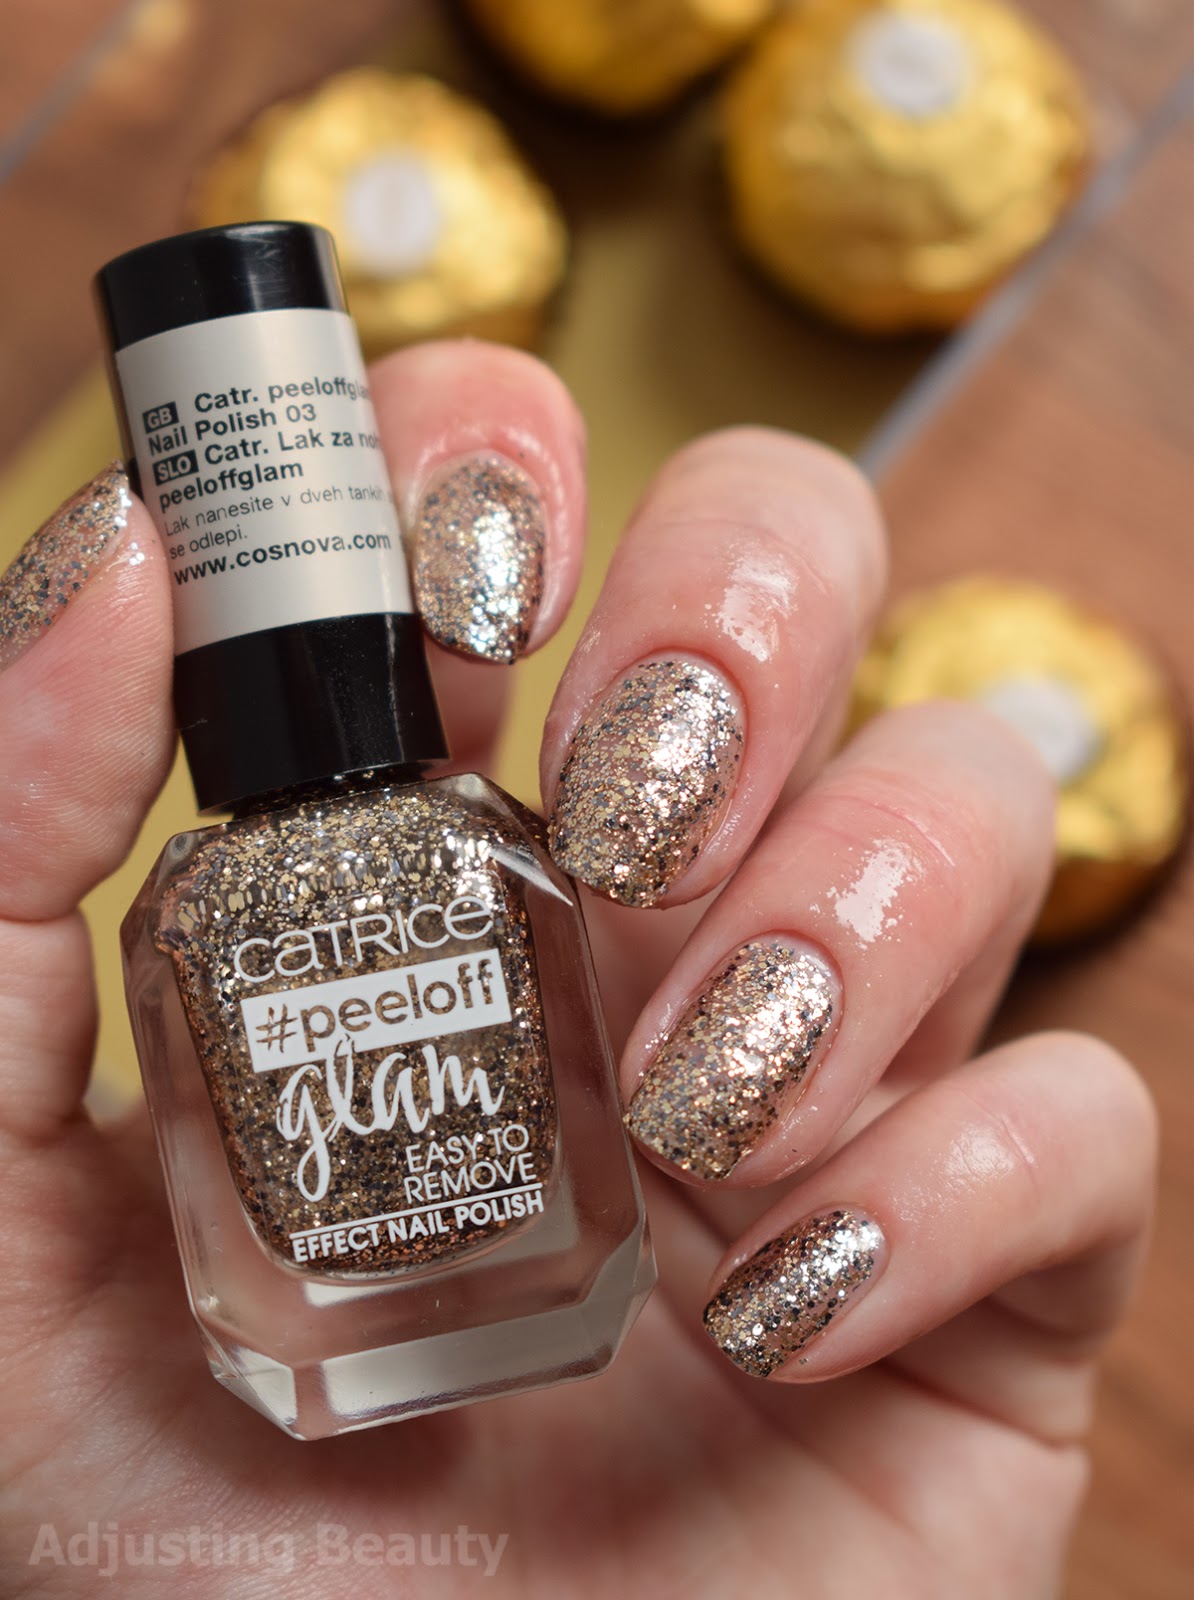 Review Catrice Peeloff Glam Effect Nail Polish 03 When In Doubt Just Add Glitter Adjusting Beauty